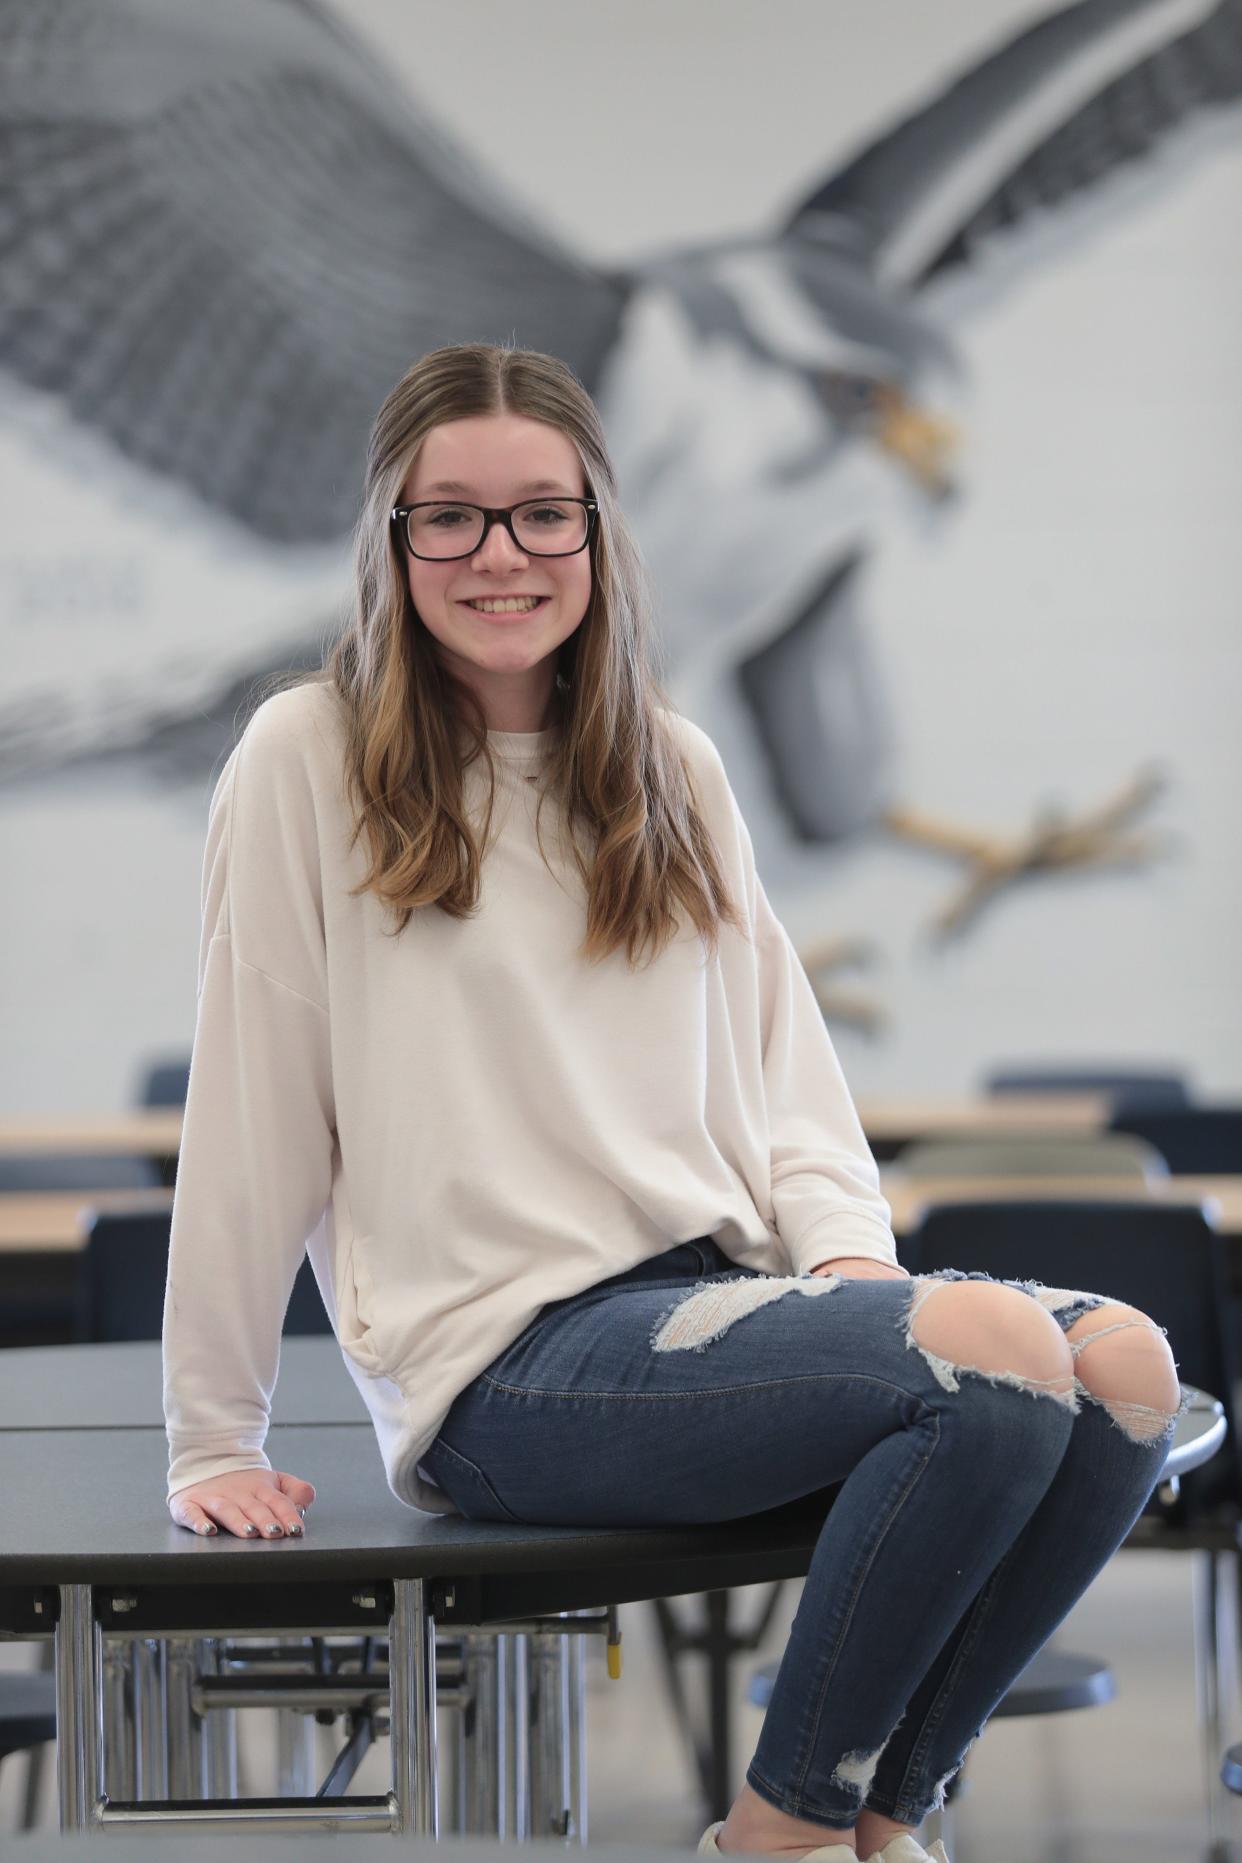 Skylar Blumenauer, a senior at Fairless High School, is one of 100 students from across the U.S. selected to be part of the Disney Dreamers Academy, an educational mentorship program created and hosted by Walt Disney World Resort. She will be heading to Florida in March.